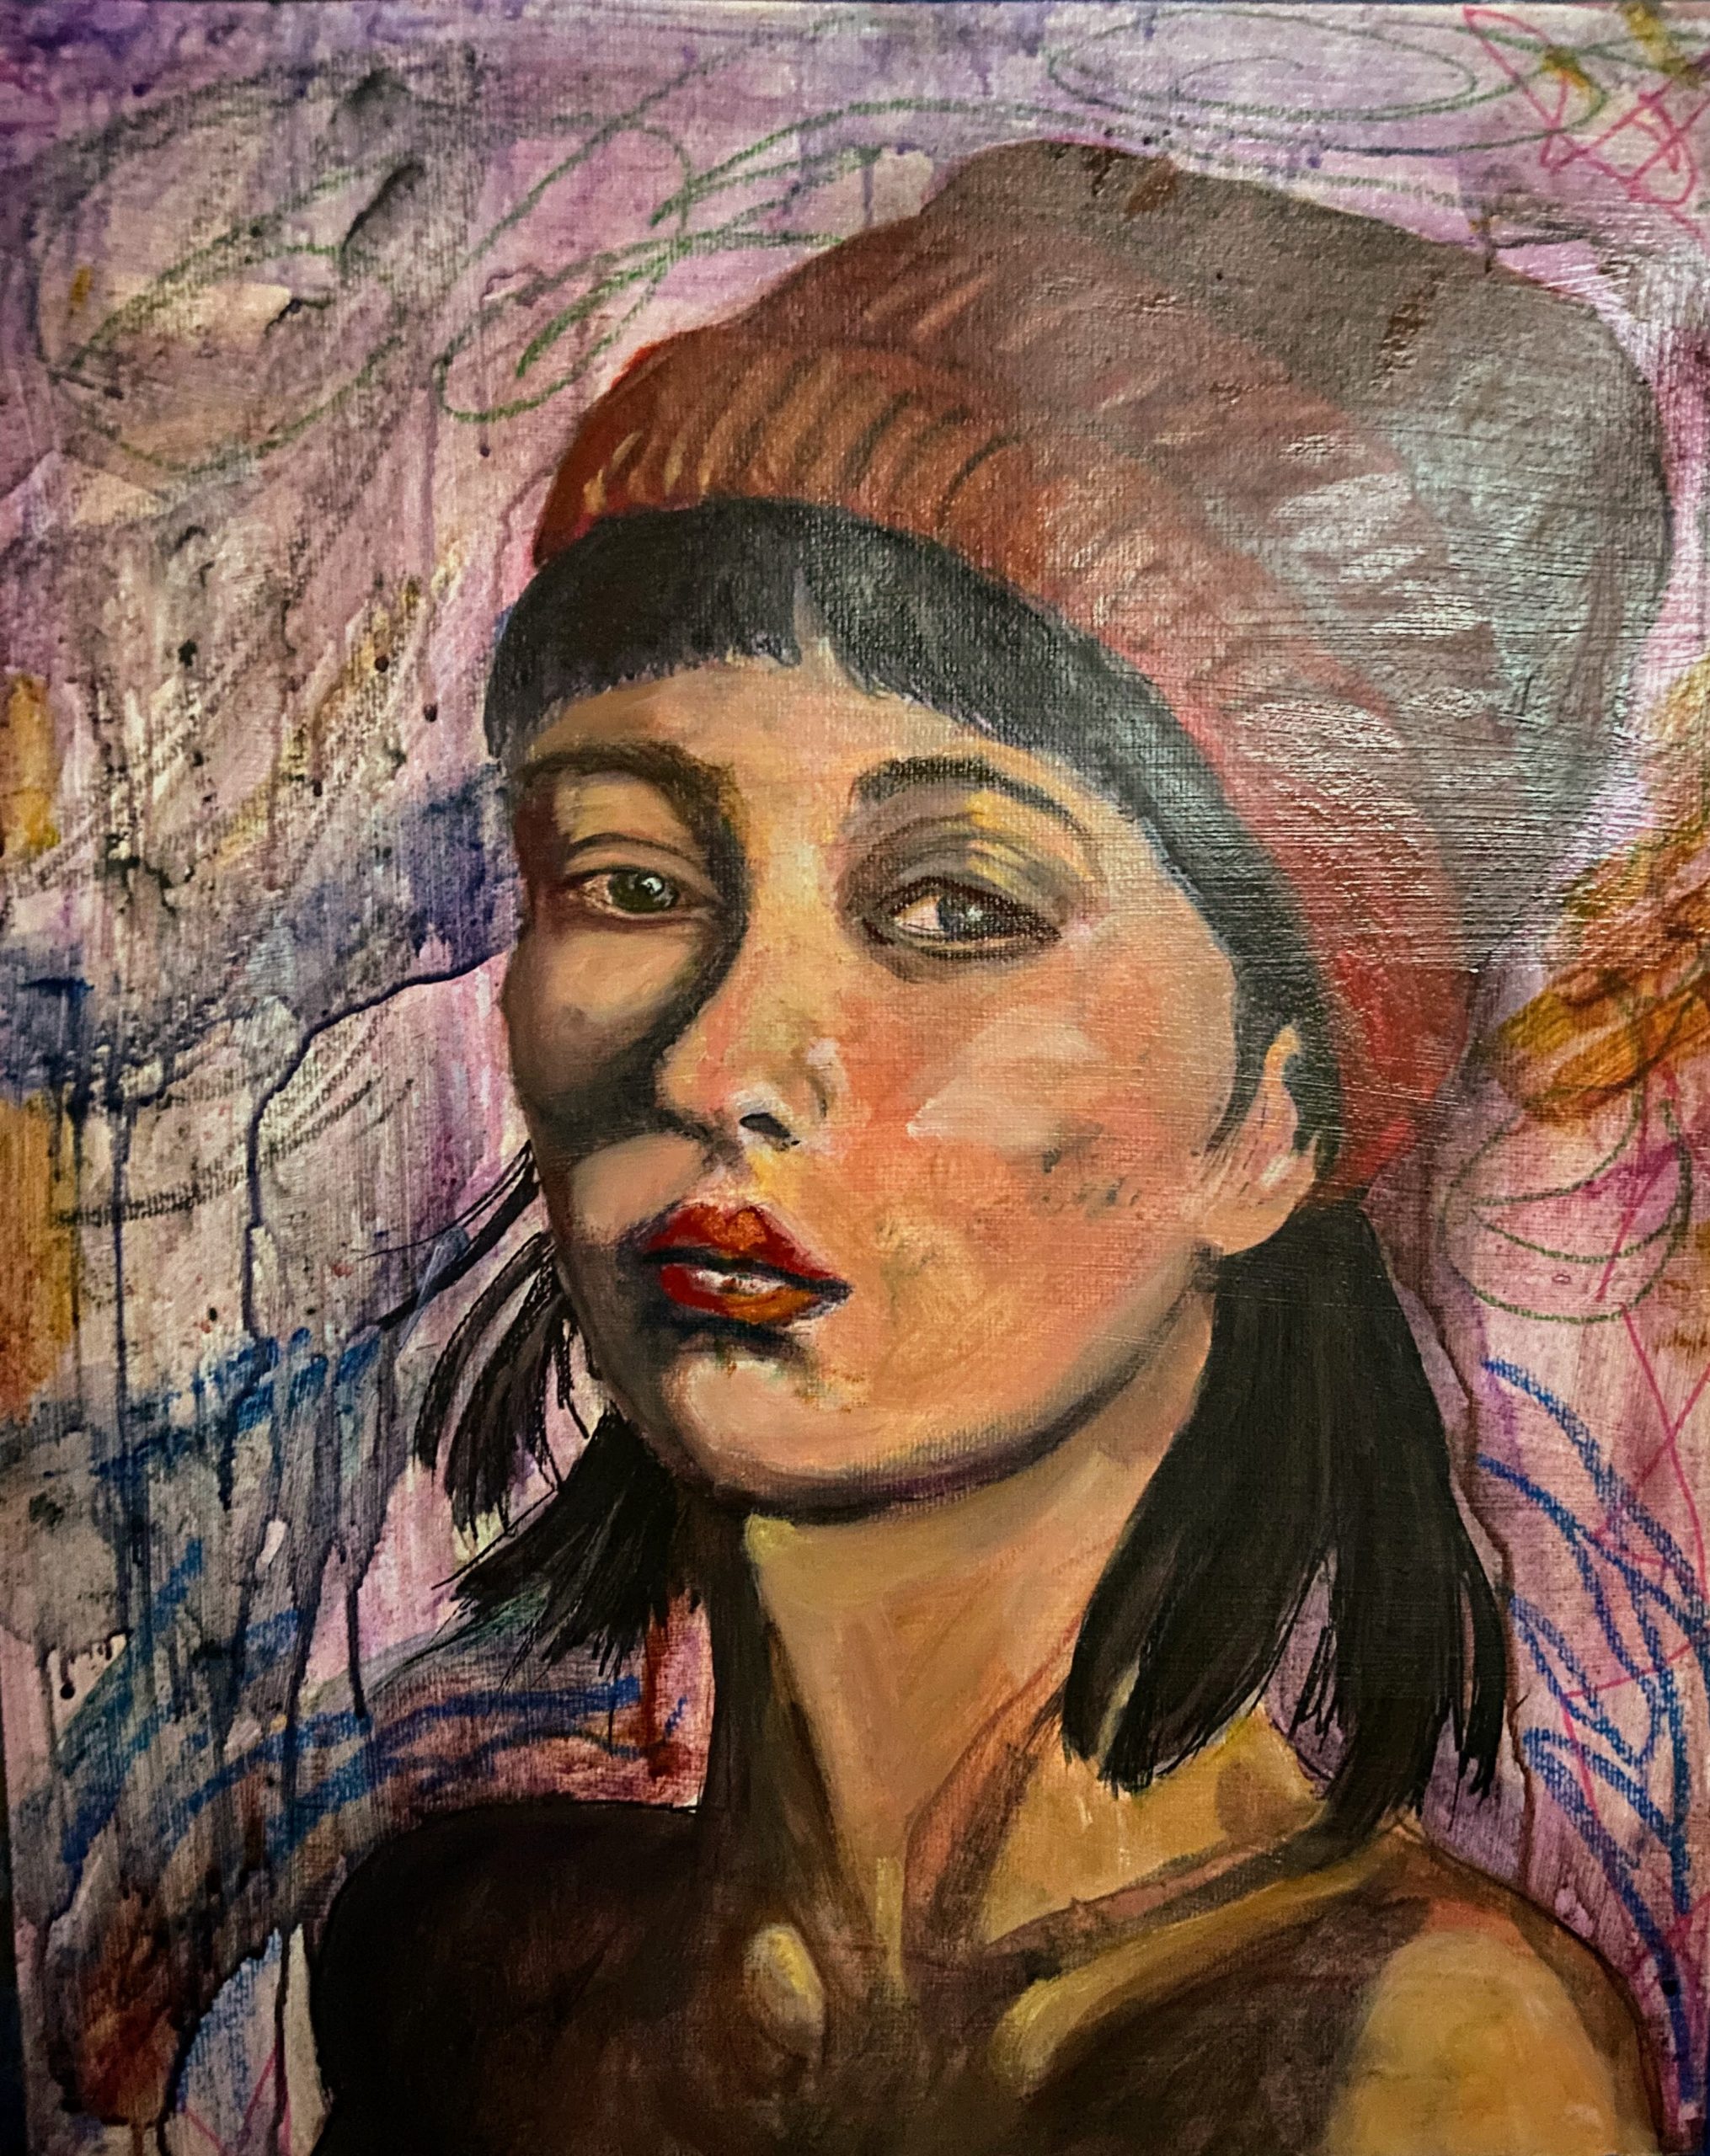 Portrait of a young girl in a knit cap done in a grunge style